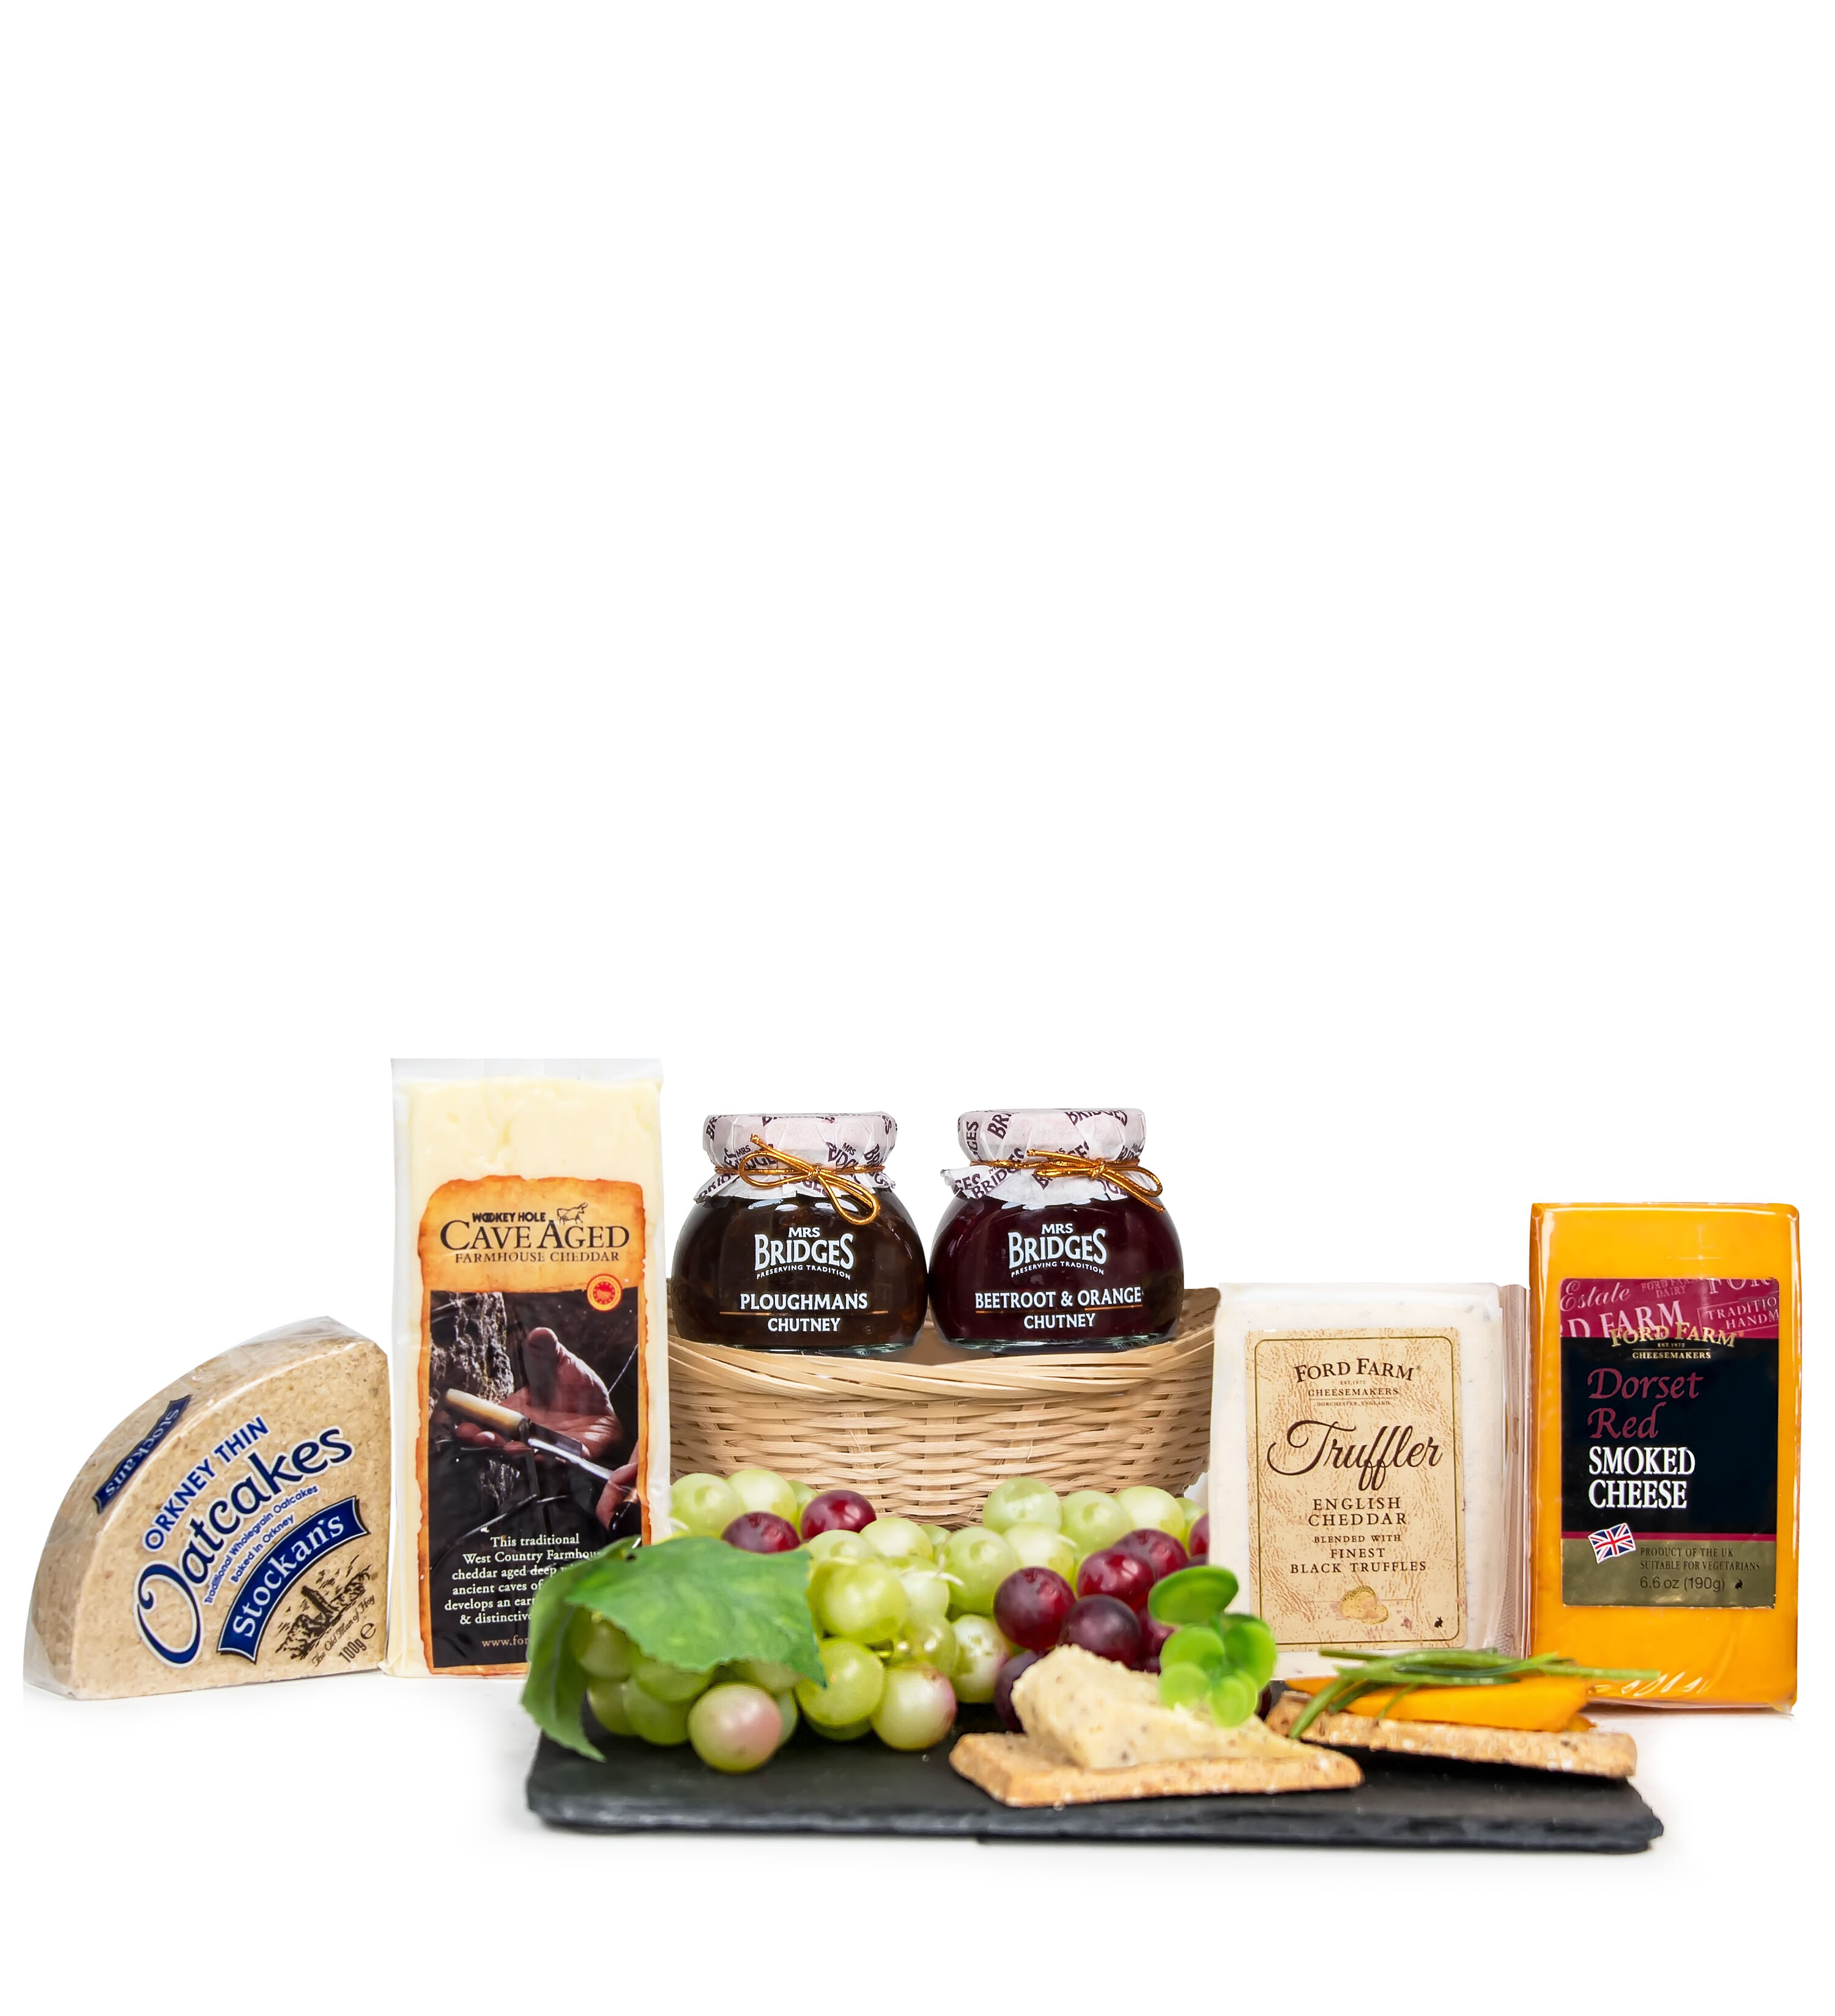 Country Cheese Basket - Cheese Gifts - Cheese Gift Baskets - Cheese Gift Delivery - Cheese Gift Sets - Cheese Hampers - Cheese Hamper Delivery